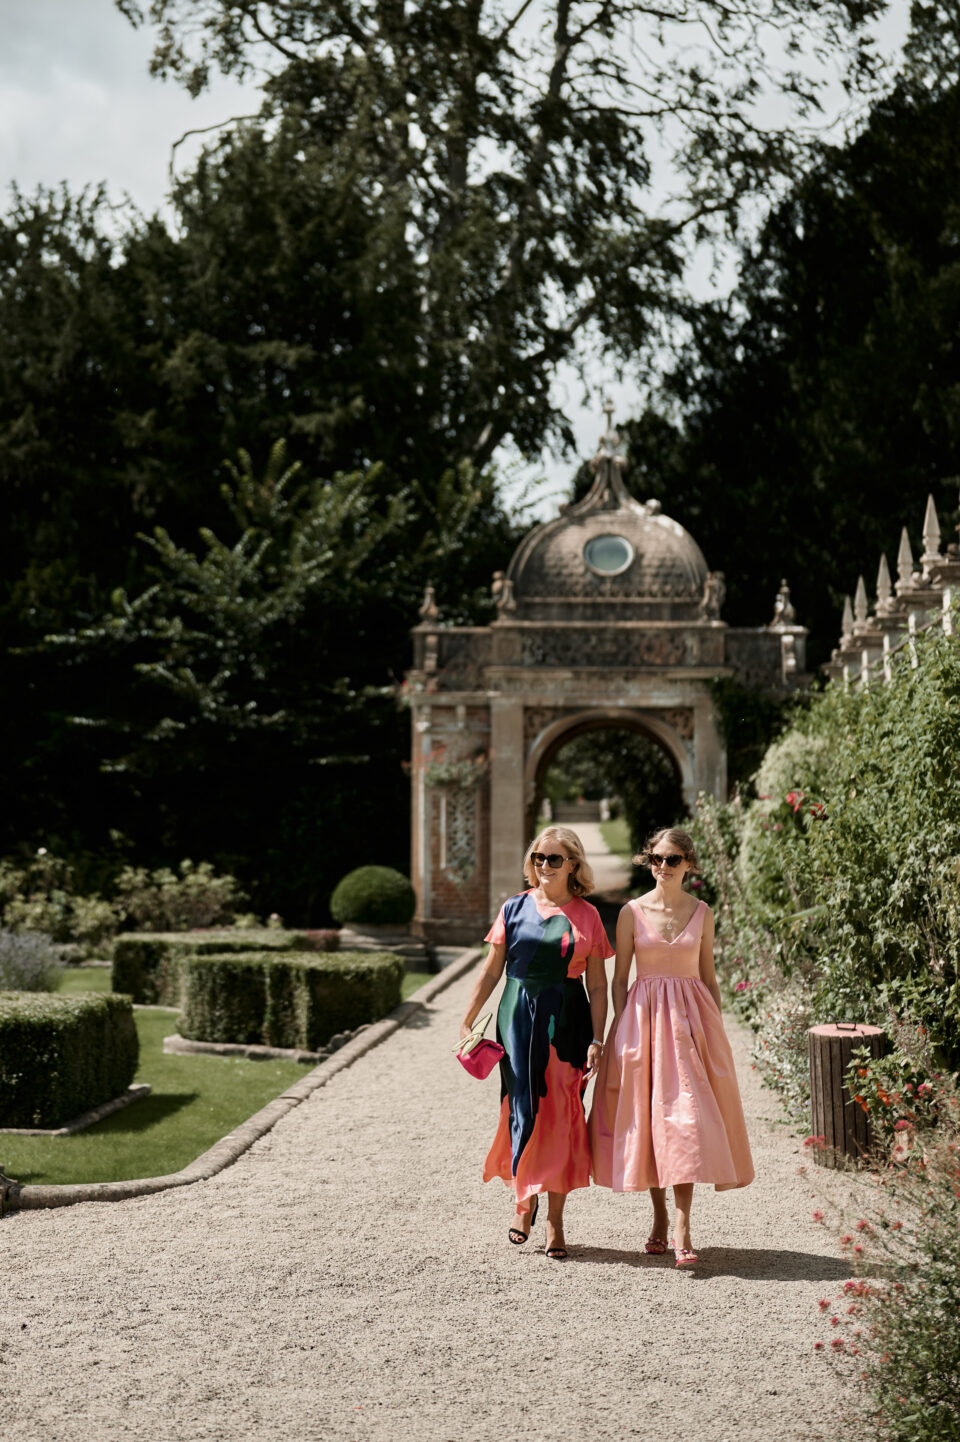 Two girls wearing pink dresses are strolling down a garden path.